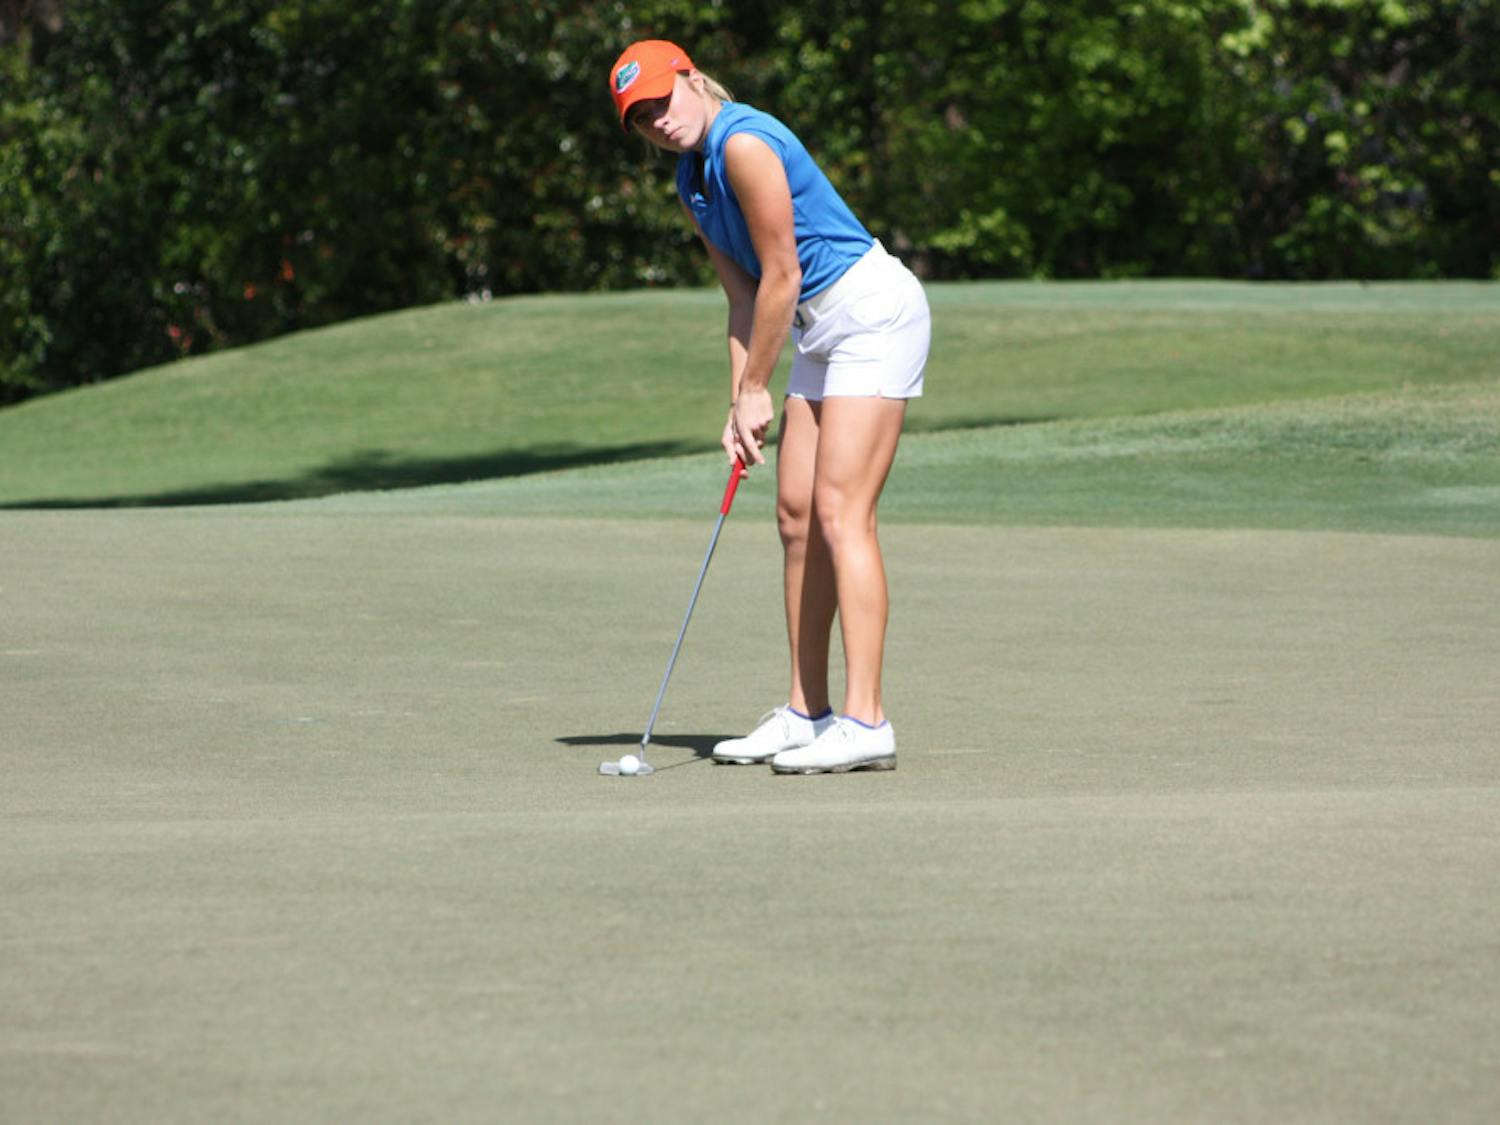 Senior Sierra Brooks led the Gators in stroke average (72.59) last season and is projected to lead her team to a successful season.